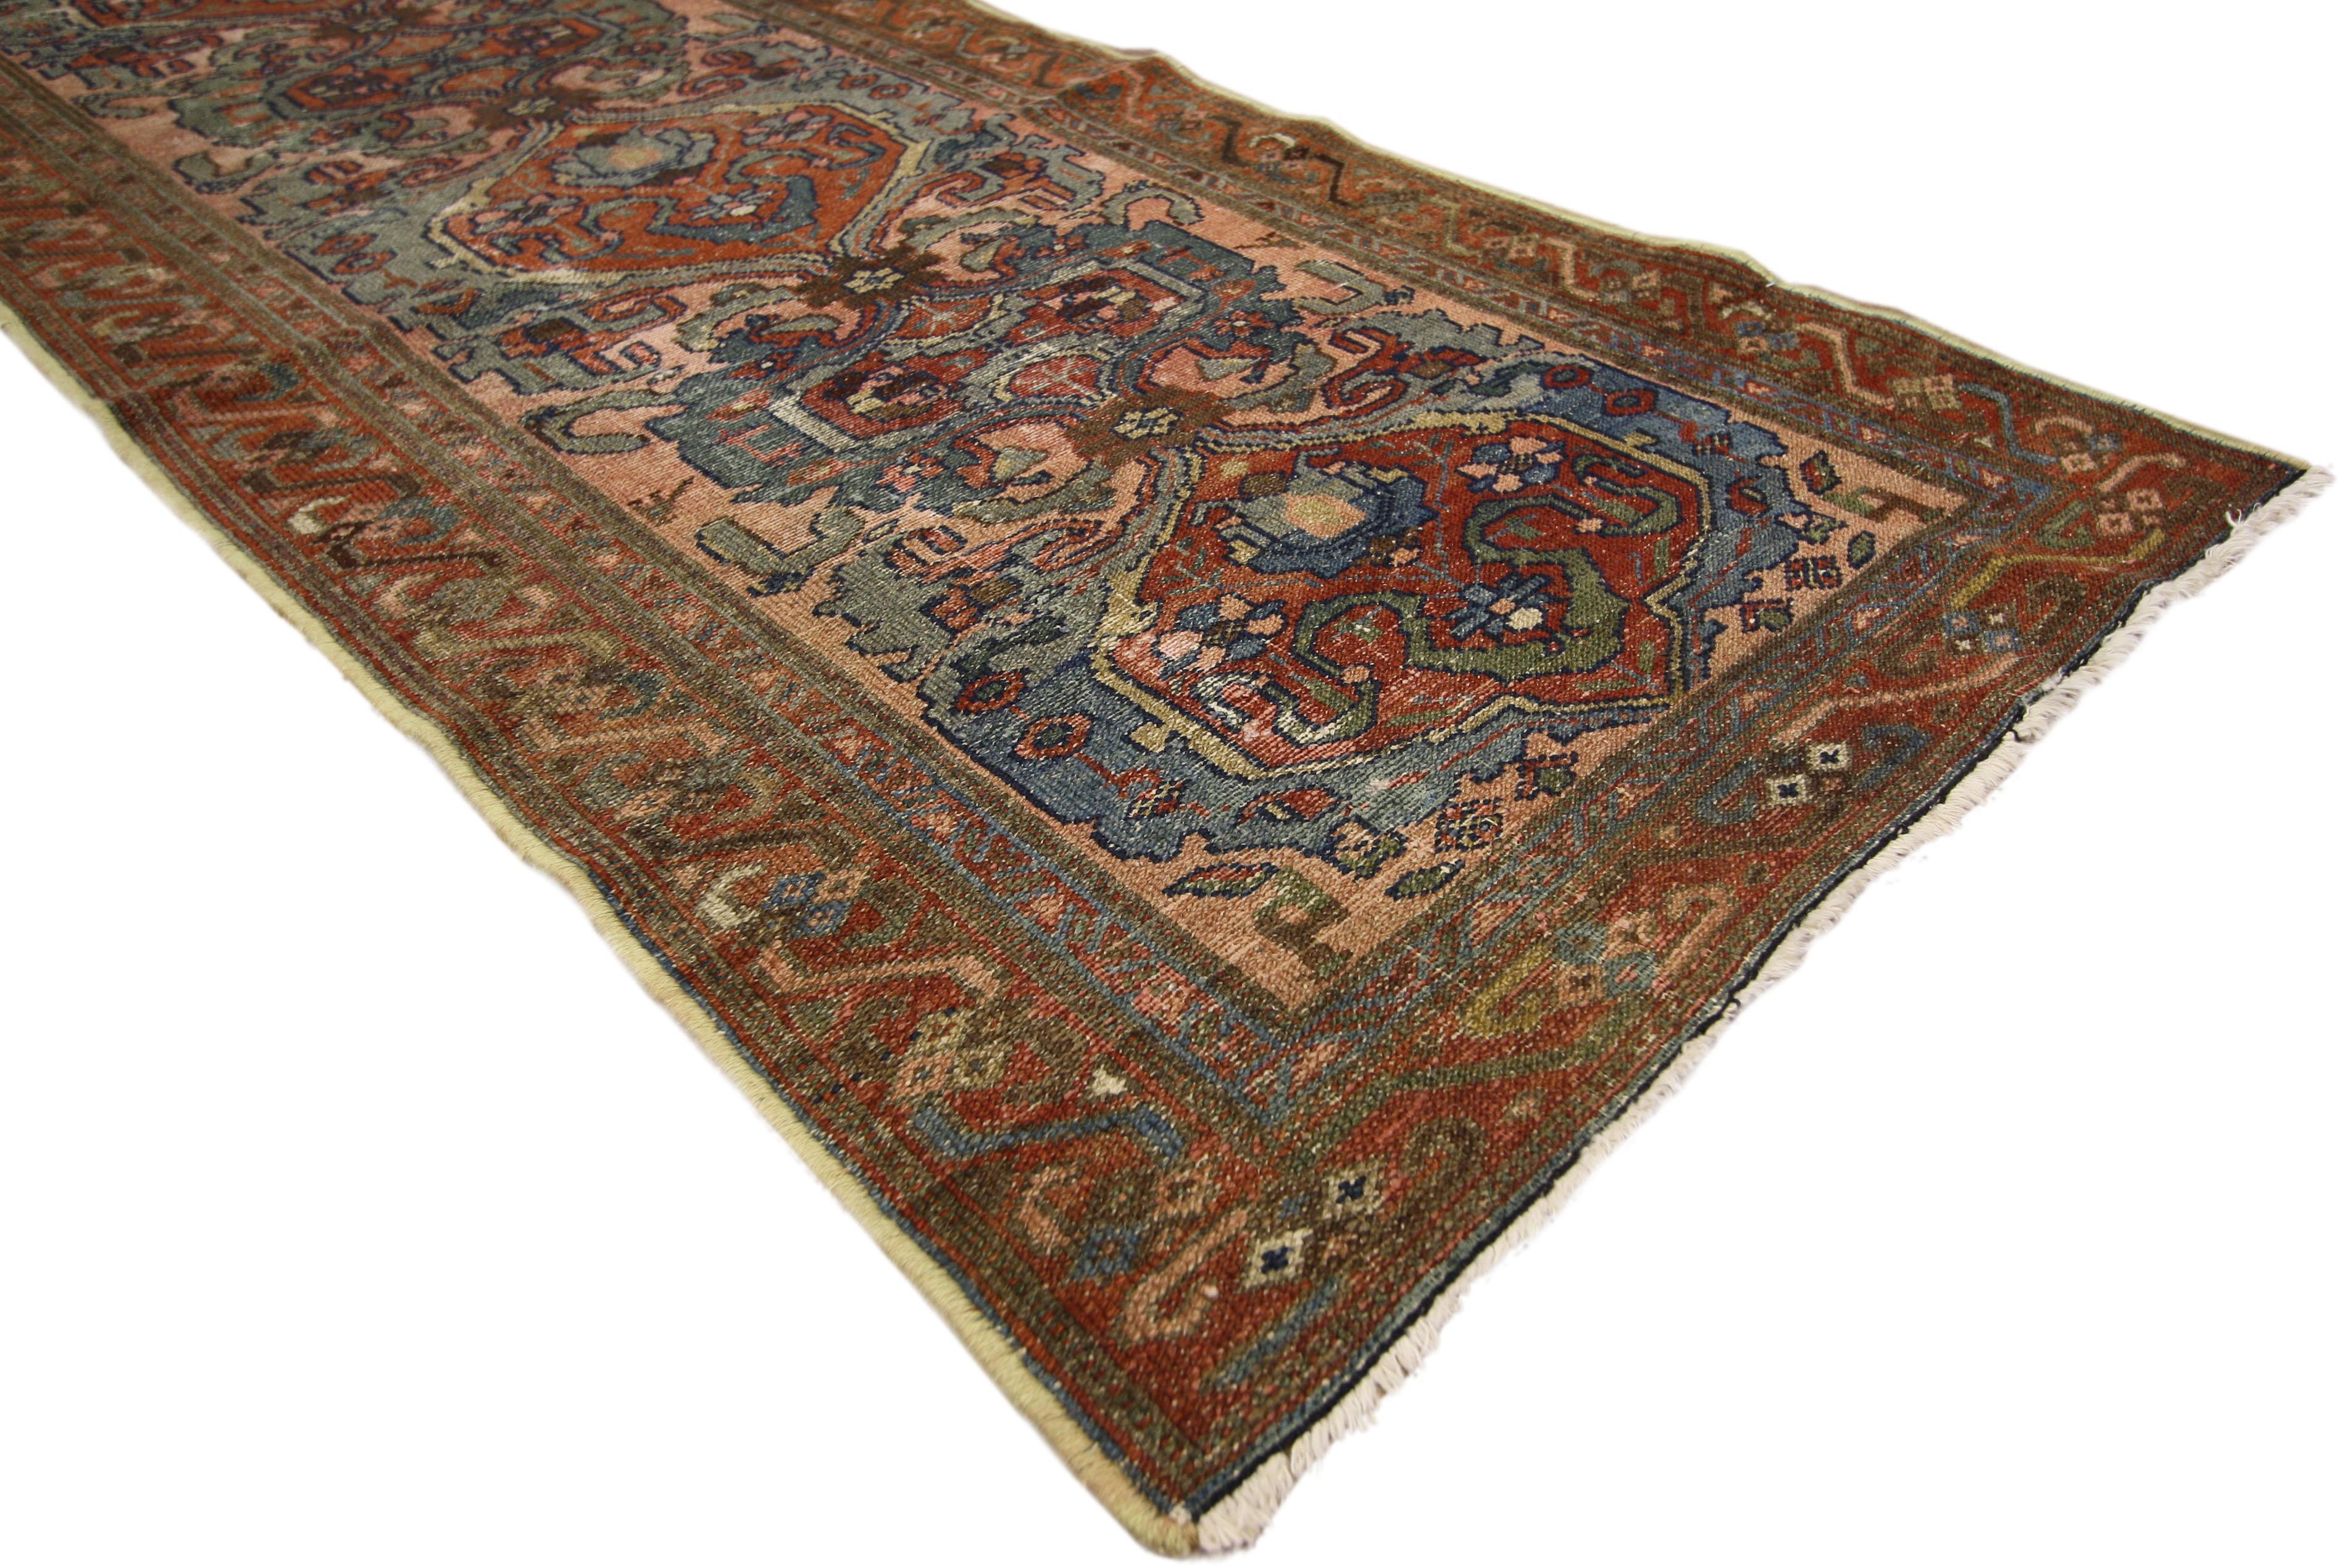 74475, distressed antique Persian Hamadan runner, Industrial hallway runner with unique cloud band design 02'07 x 10'05. Exhibiting the desirable wear and tear of an authentic antique, this distressed Persian Hamadan runner features a unique cloud